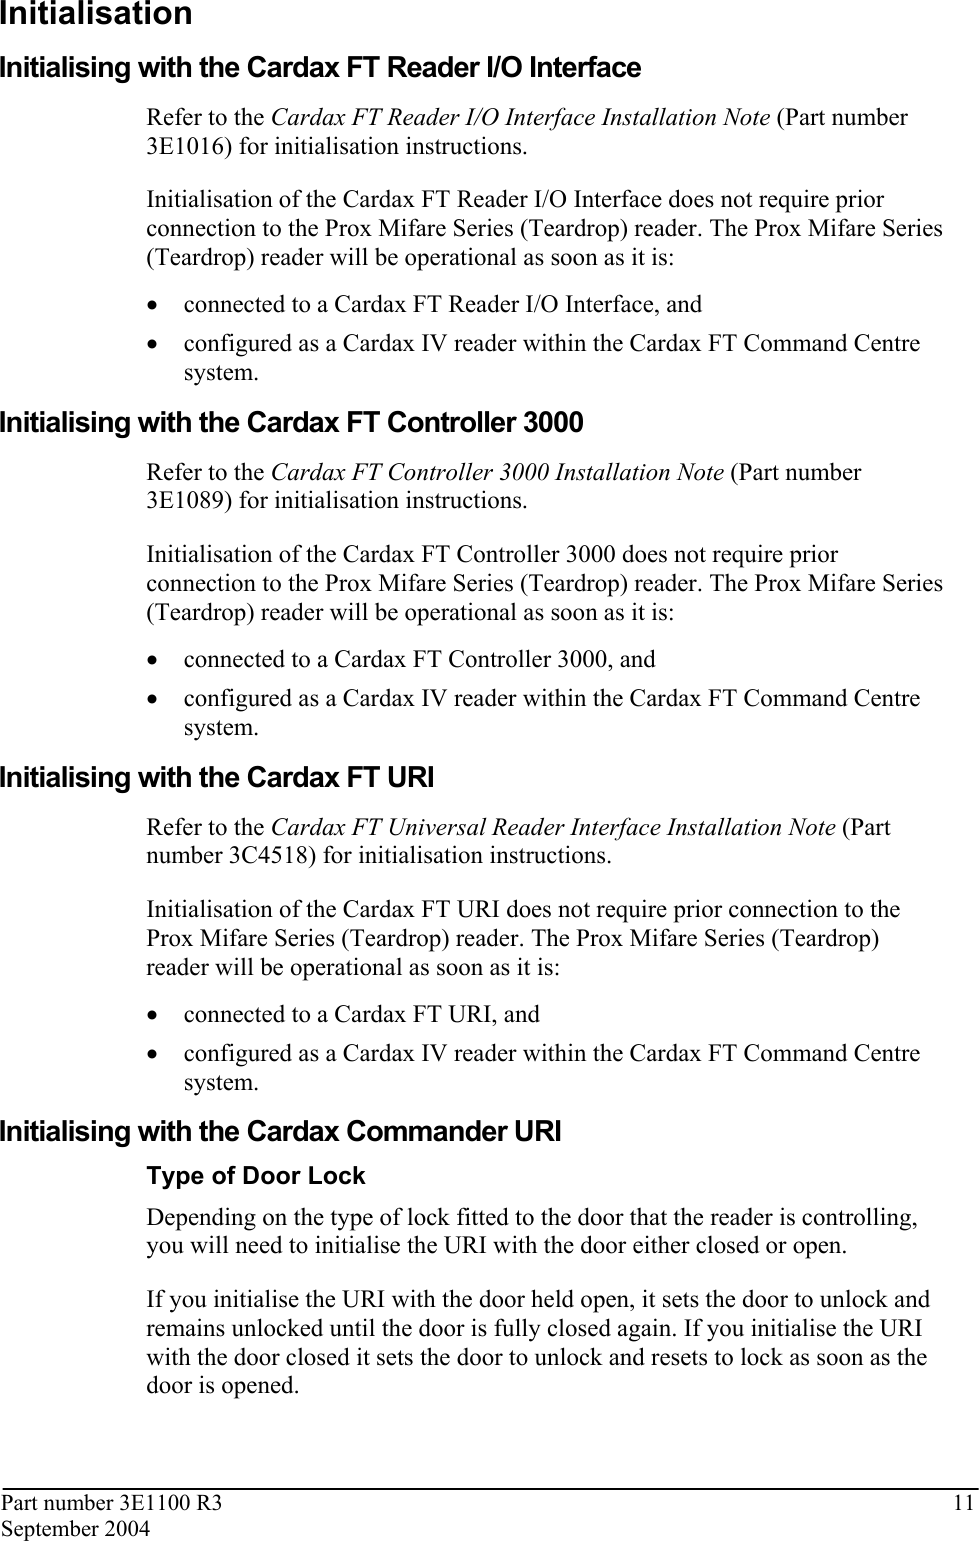 Part number 3E1100 R3  11 September 2004  Initialisation Initialising with the Cardax FT Reader I/O Interface Refer to the Cardax FT Reader I/O Interface Installation Note (Part number 3E1016) for initialisation instructions. Initialisation of the Cardax FT Reader I/O Interface does not require prior connection to the Prox Mifare Series (Teardrop) reader. The Prox Mifare Series (Teardrop) reader will be operational as soon as it is: • connected to a Cardax FT Reader I/O Interface, and  • configured as a Cardax IV reader within the Cardax FT Command Centre system.  Initialising with the Cardax FT Controller 3000 Refer to the Cardax FT Controller 3000 Installation Note (Part number 3E1089) for initialisation instructions. Initialisation of the Cardax FT Controller 3000 does not require prior connection to the Prox Mifare Series (Teardrop) reader. The Prox Mifare Series (Teardrop) reader will be operational as soon as it is: • connected to a Cardax FT Controller 3000, and  • configured as a Cardax IV reader within the Cardax FT Command Centre system.  Initialising with the Cardax FT URI Refer to the Cardax FT Universal Reader Interface Installation Note (Part number 3C4518) for initialisation instructions. Initialisation of the Cardax FT URI does not require prior connection to the Prox Mifare Series (Teardrop) reader. The Prox Mifare Series (Teardrop) reader will be operational as soon as it is: • connected to a Cardax FT URI, and  • configured as a Cardax IV reader within the Cardax FT Command Centre system.  Initialising with the Cardax Commander URI Type of Door Lock Depending on the type of lock fitted to the door that the reader is controlling, you will need to initialise the URI with the door either closed or open.  If you initialise the URI with the door held open, it sets the door to unlock and remains unlocked until the door is fully closed again. If you initialise the URI with the door closed it sets the door to unlock and resets to lock as soon as the door is opened.  